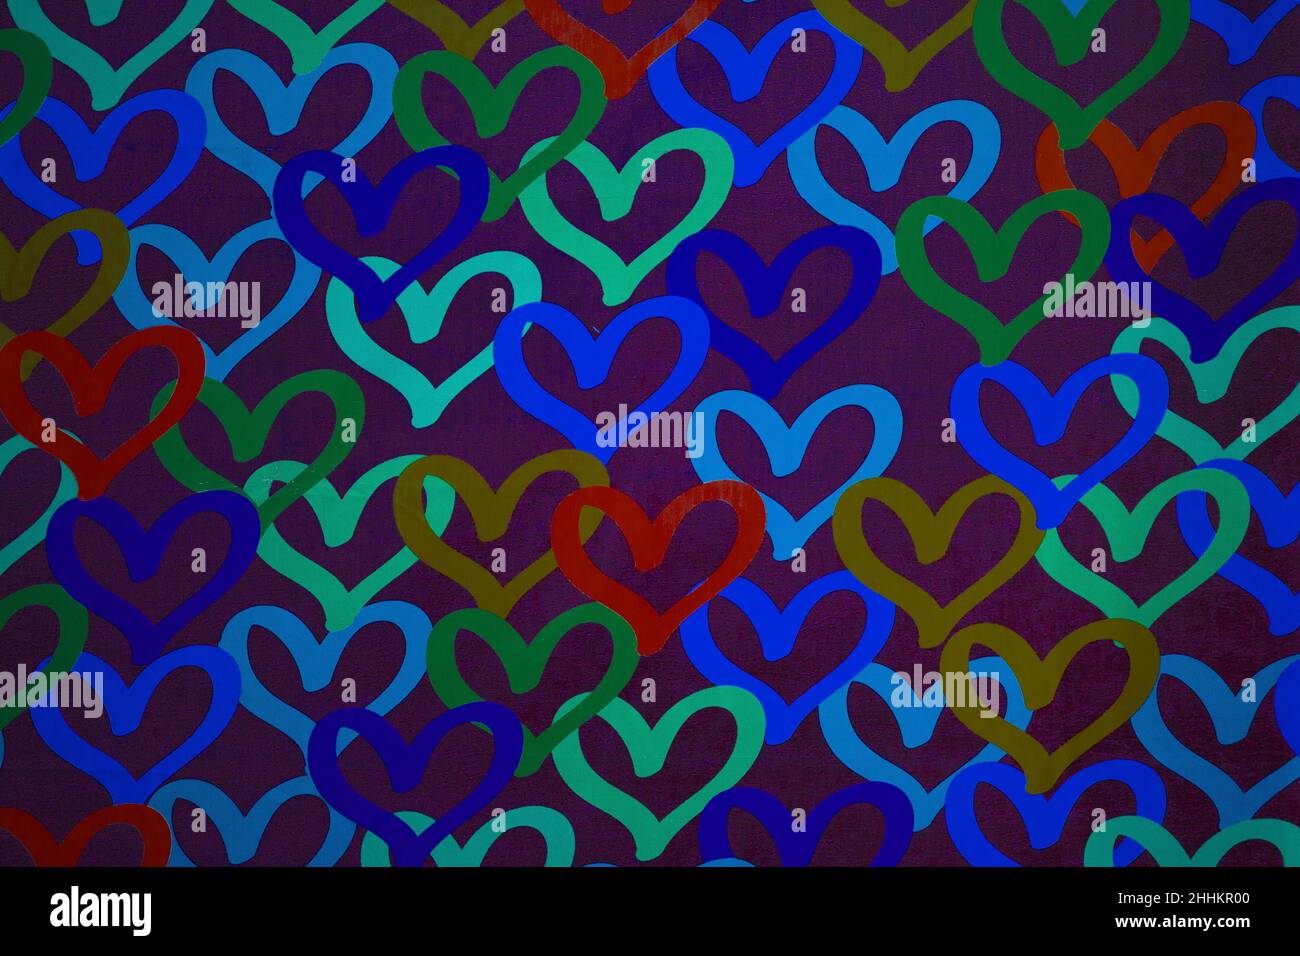 Valentine's day concept with colorful heart patterns background. Colorful love concept idea with lots of hearts on the wall illustration. Stock Photo